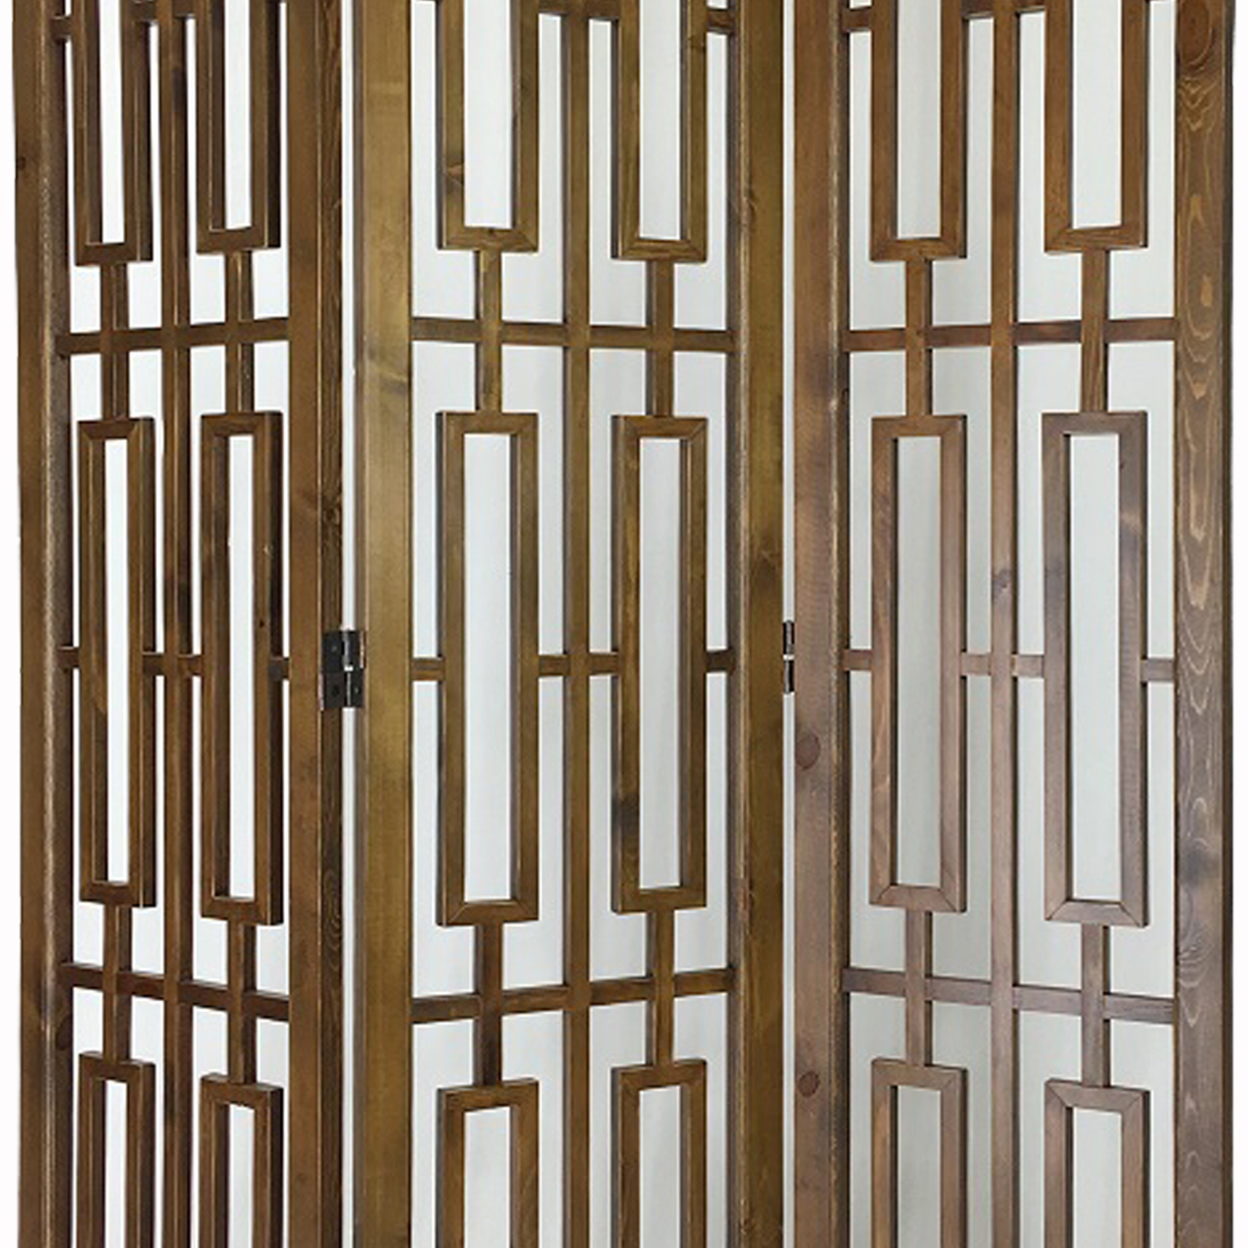 3 Panel Grained Wooden Frame Screen With Lattice Cut Outs, Brown- Saltoro Sherpi